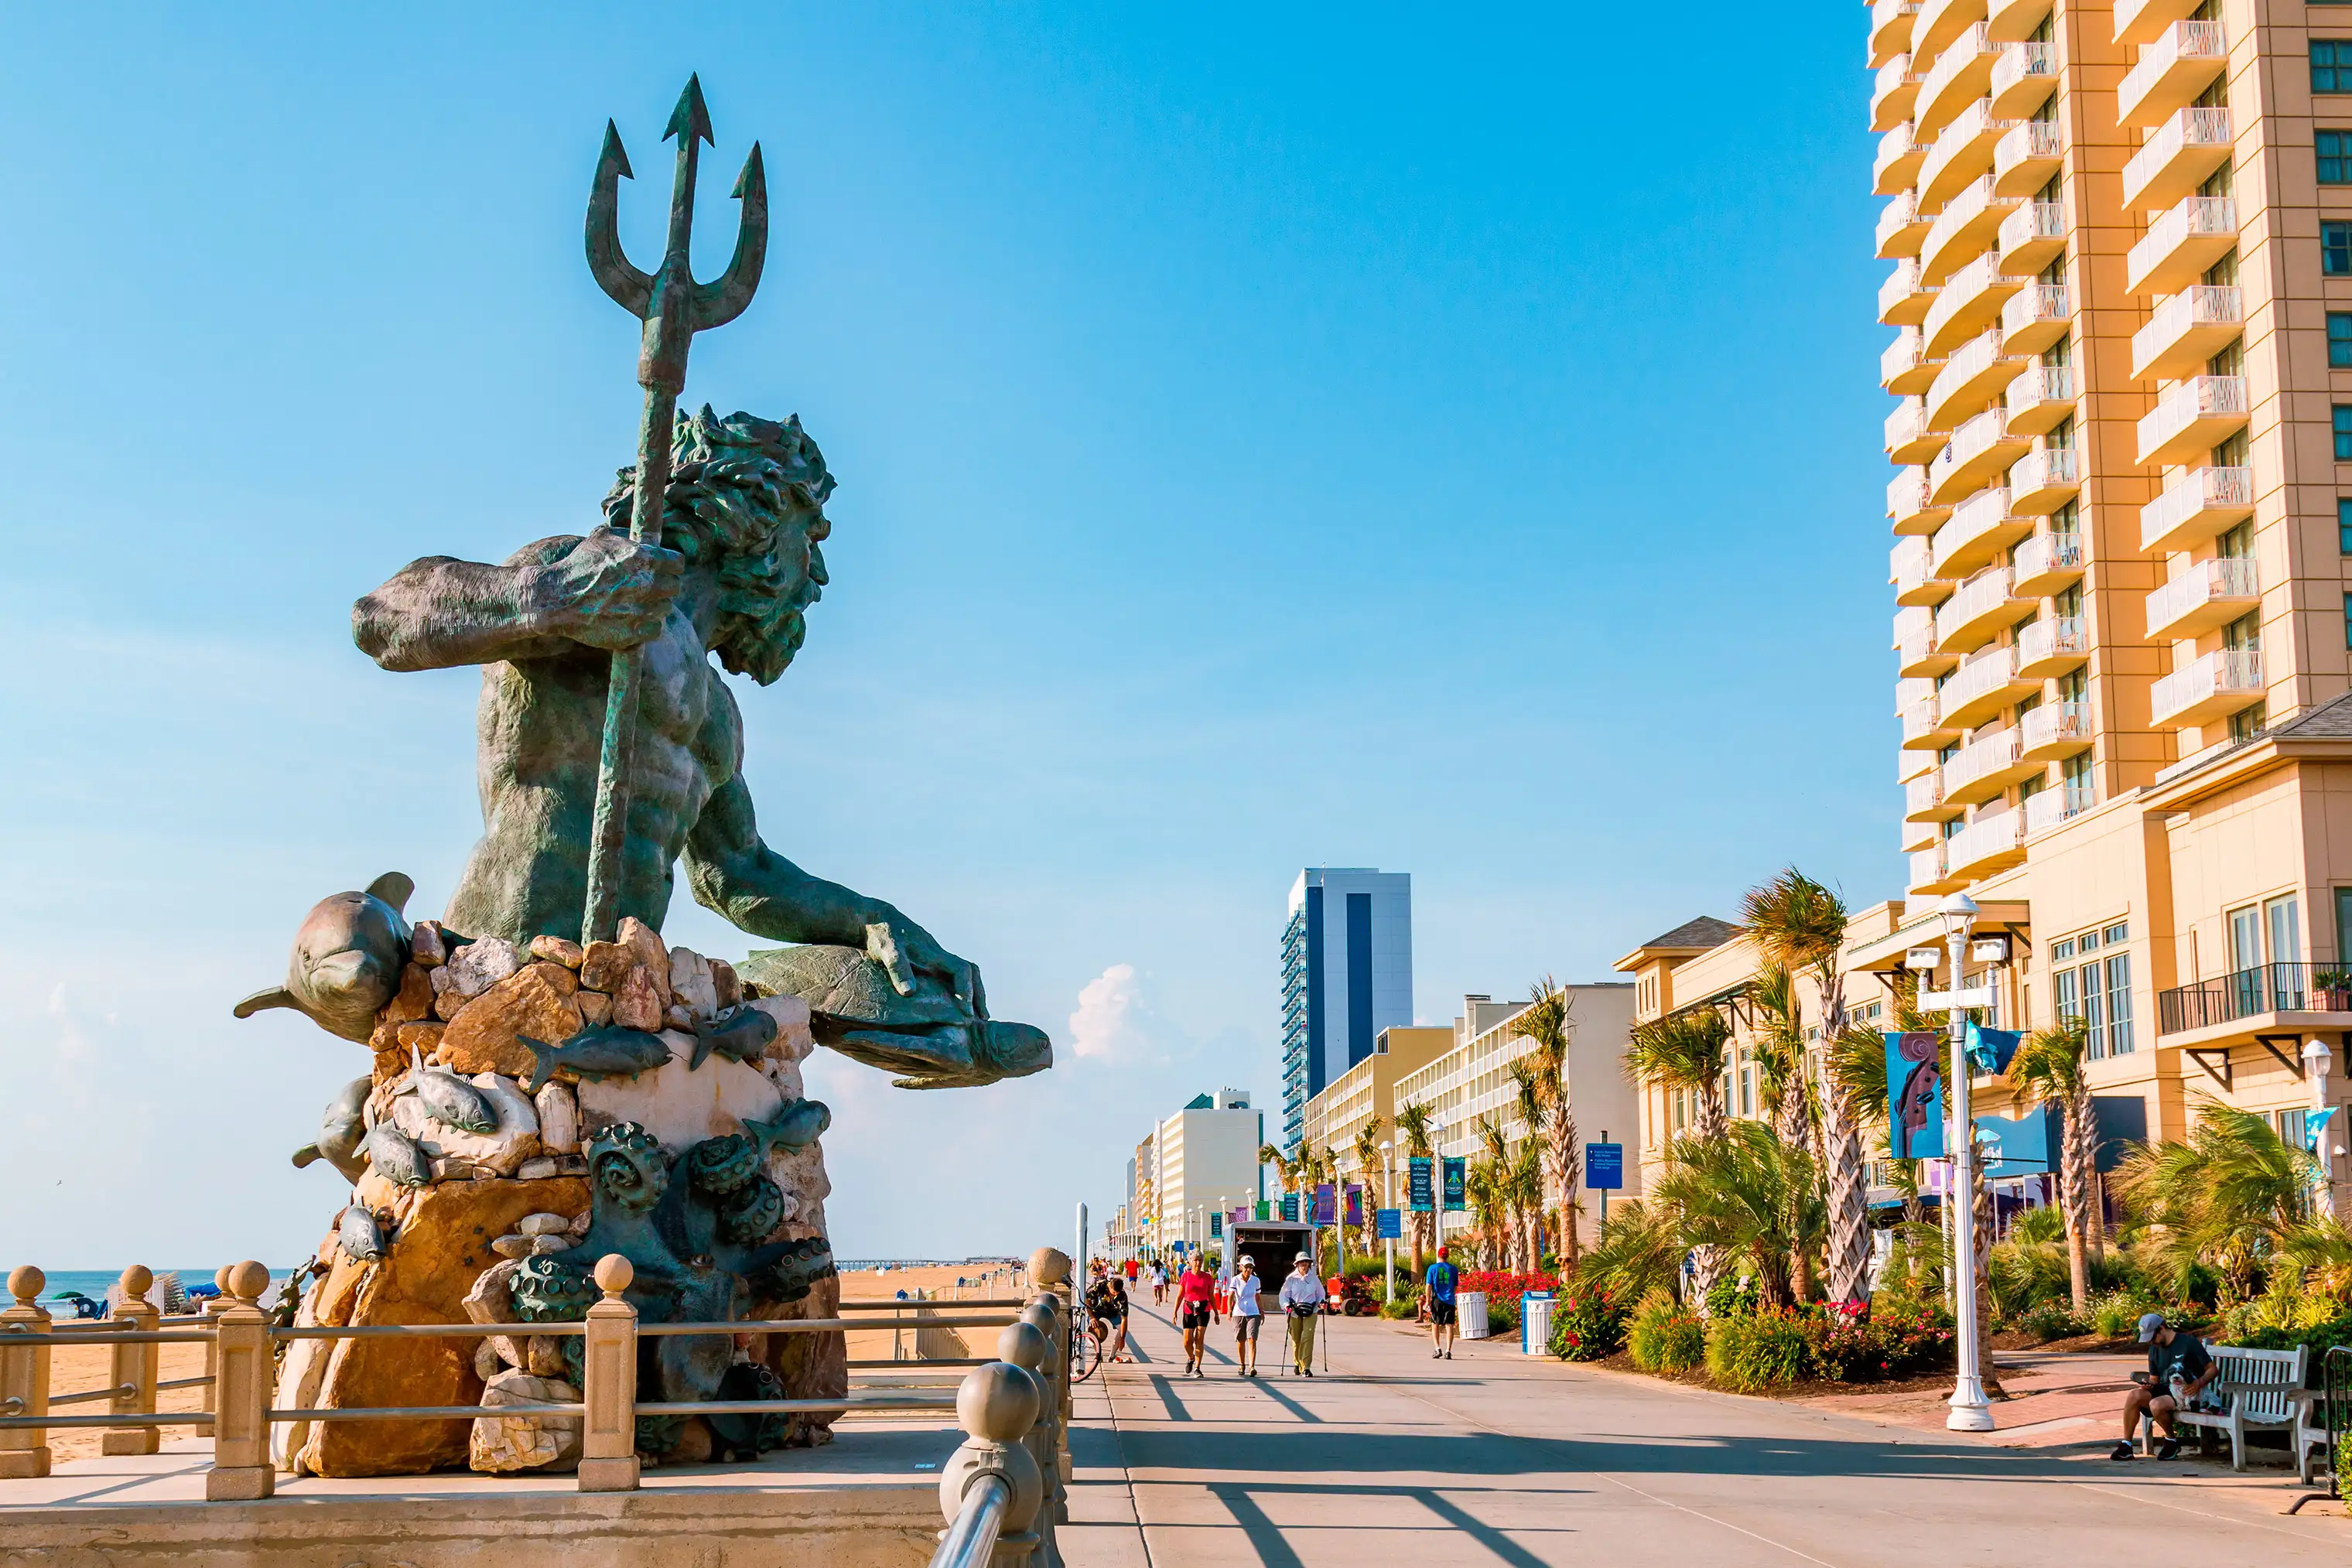 The iconic King Neptune greets visitors on a boardwalk three miles long.